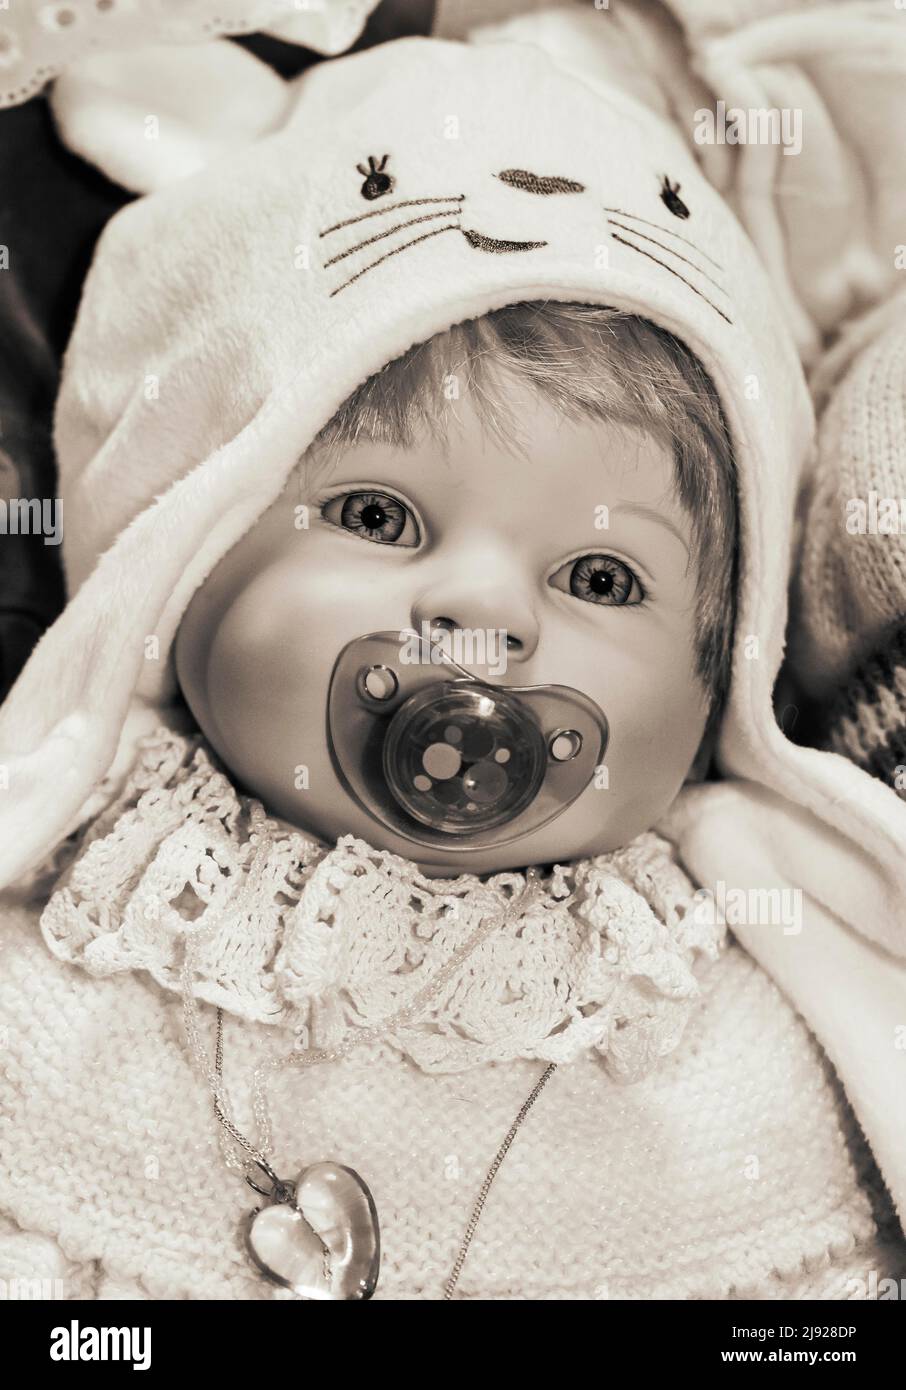 Sepia colours, portrait of an old decorative baby doll, children's toy, symbolic image, Austria Stock Photo